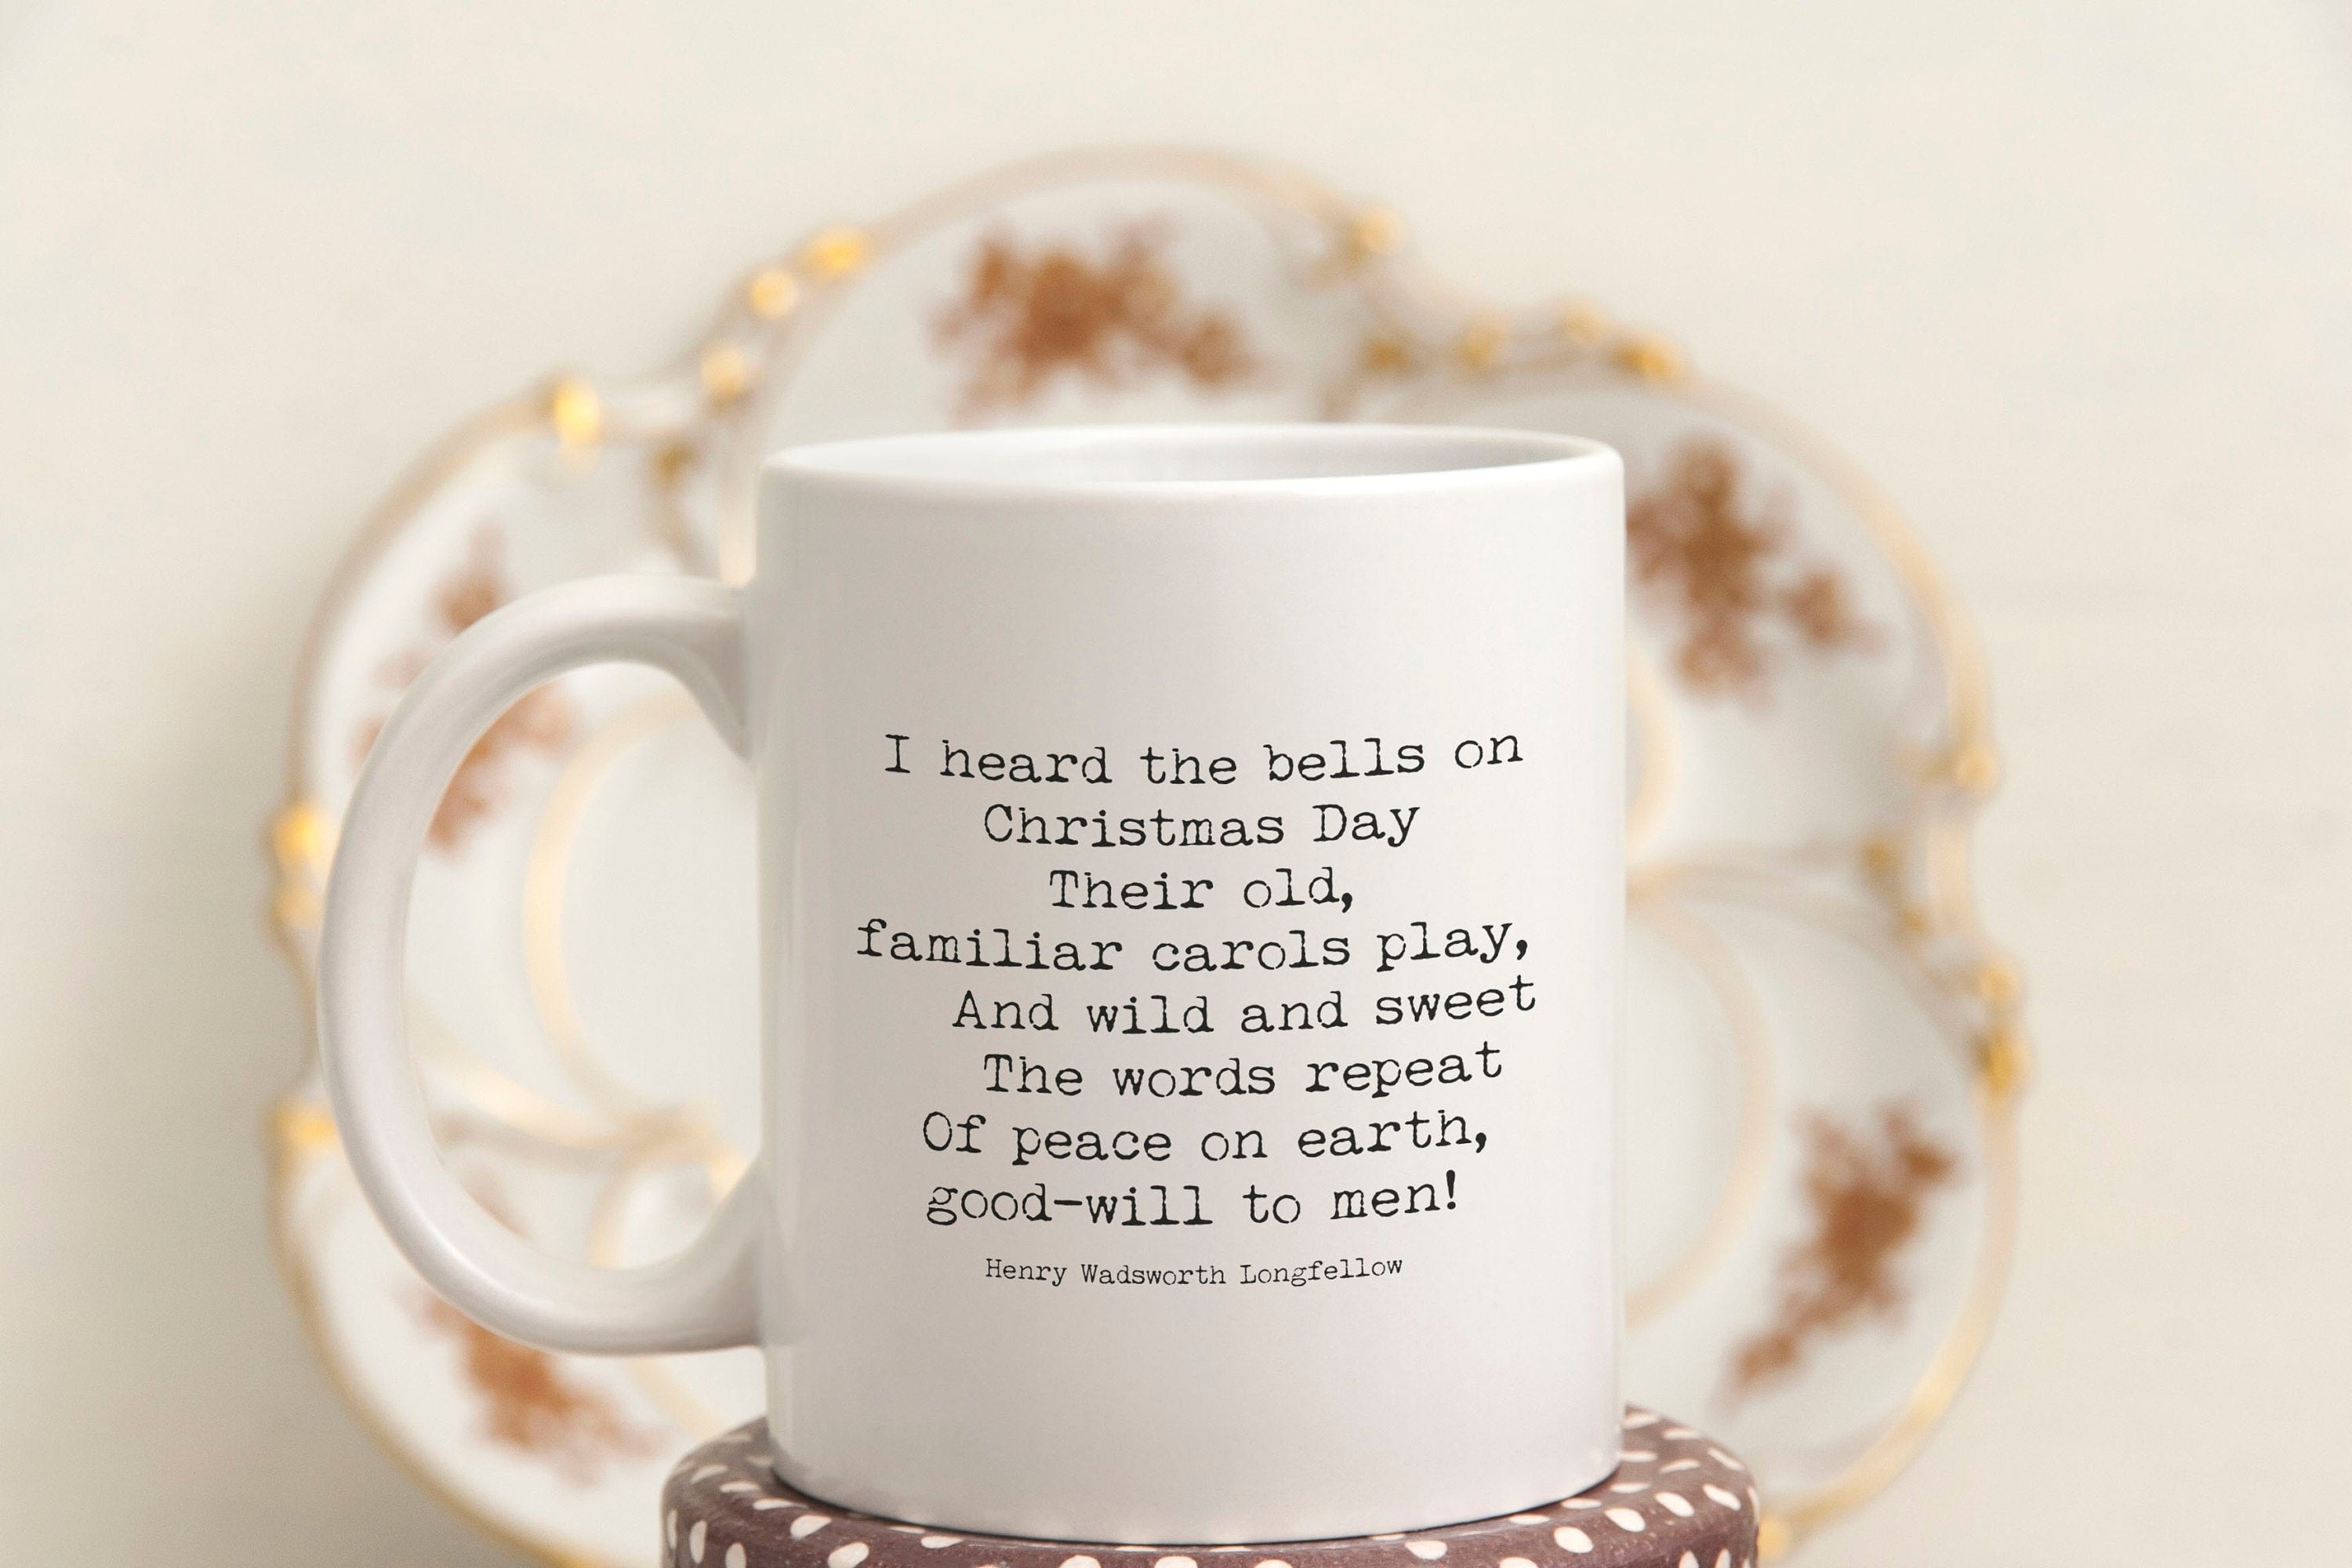 Christmas Bells Henry Wadsworth Longfellow Poem Ceramic Coffee Mug, Peace on Earth Goodwill to all Men Literary Gifts